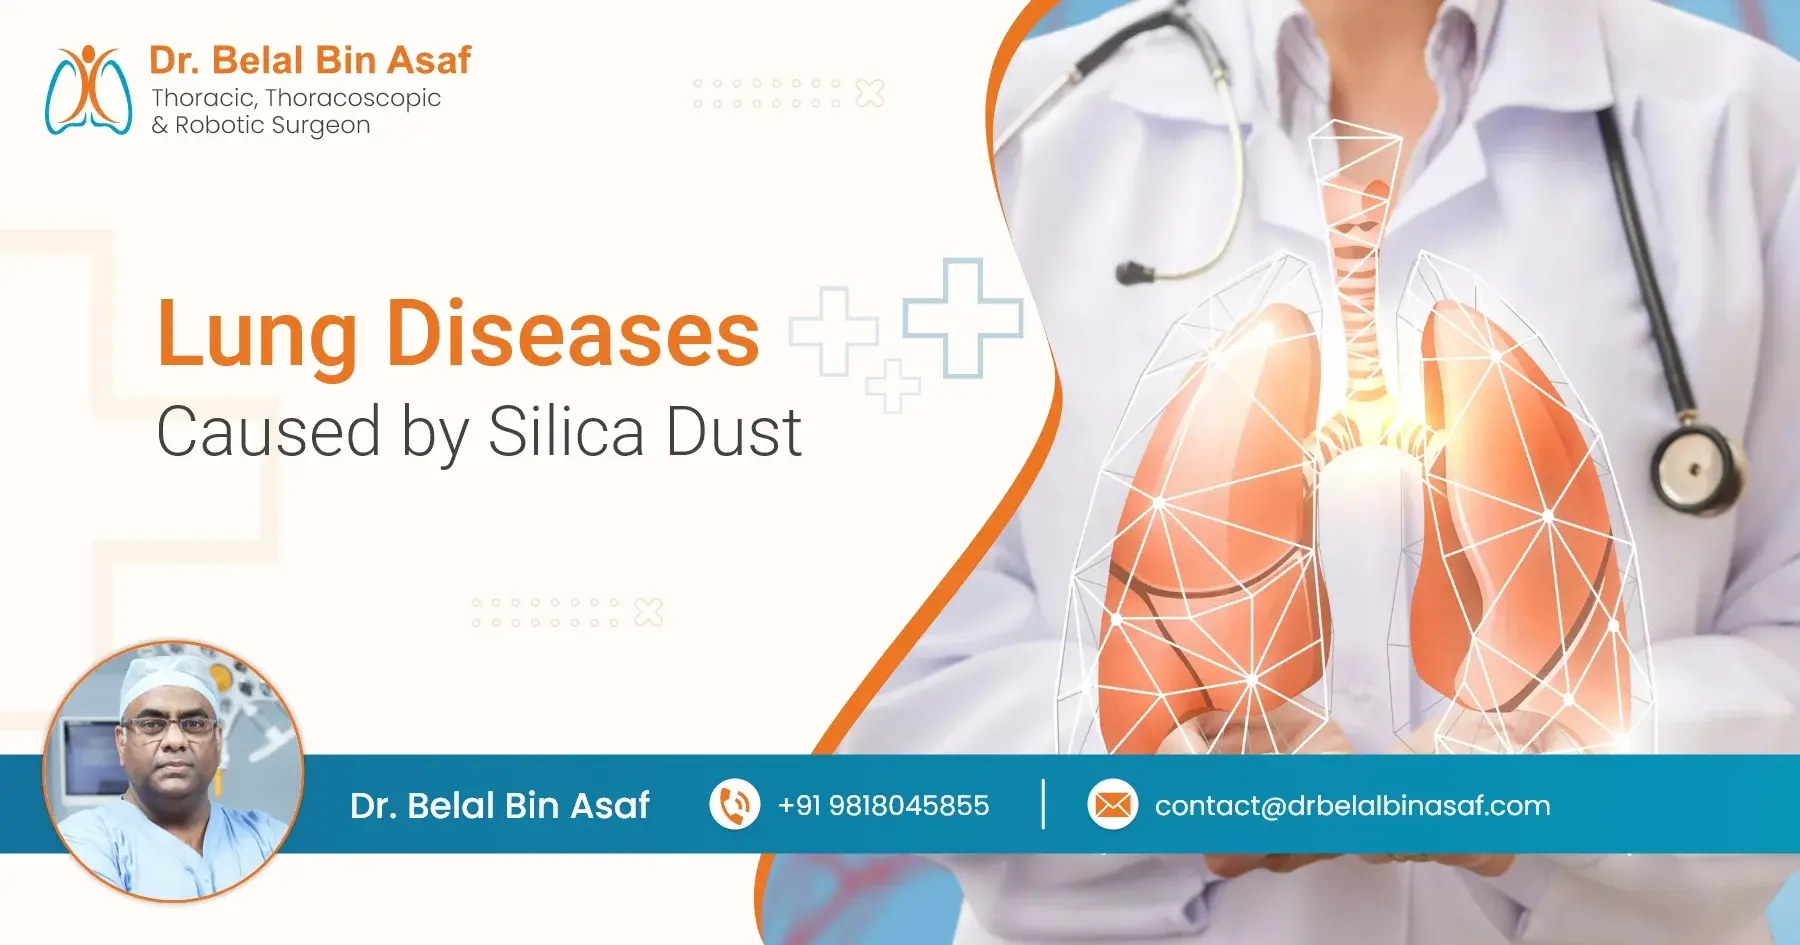 Lung Diseases Caused by Silica Dust